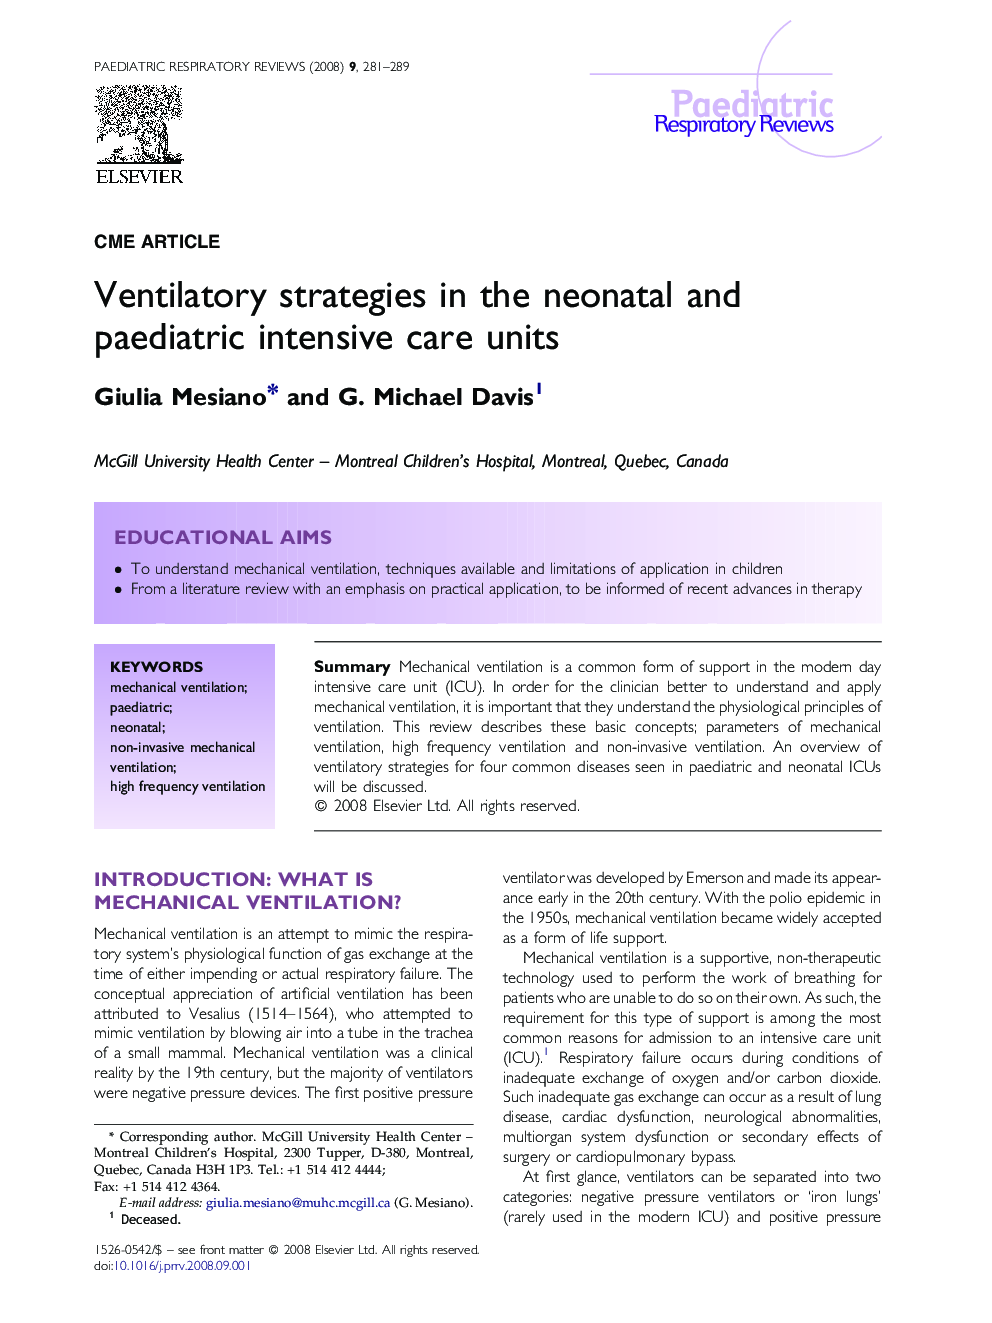 Ventilatory strategies in the neonatal and paediatric intensive care units